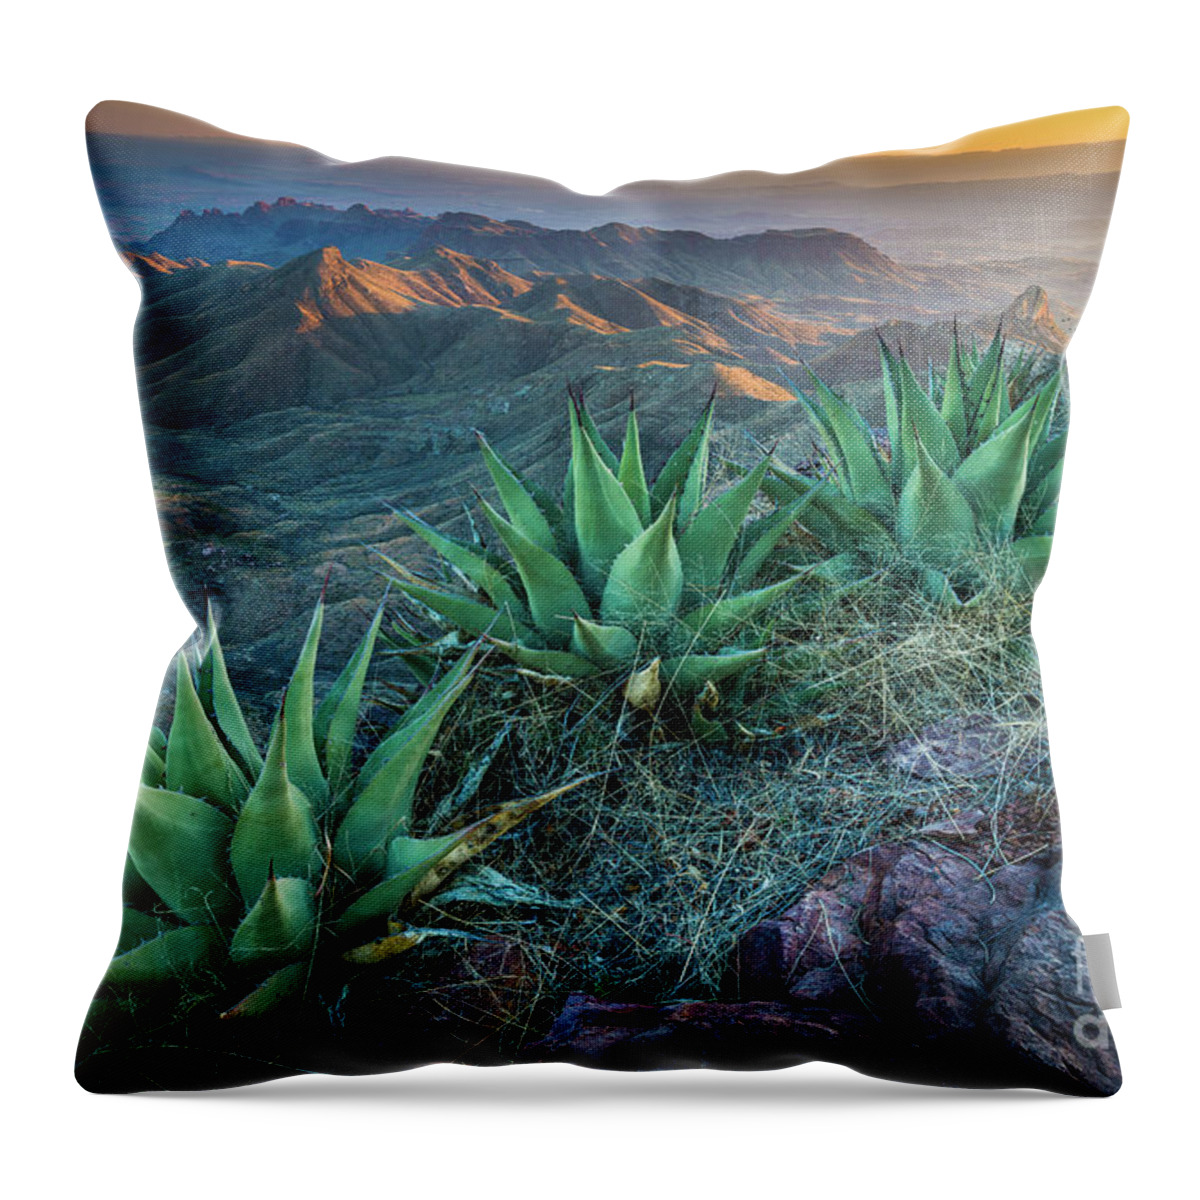 America Throw Pillow featuring the photograph South Rim Twilight by Inge Johnsson